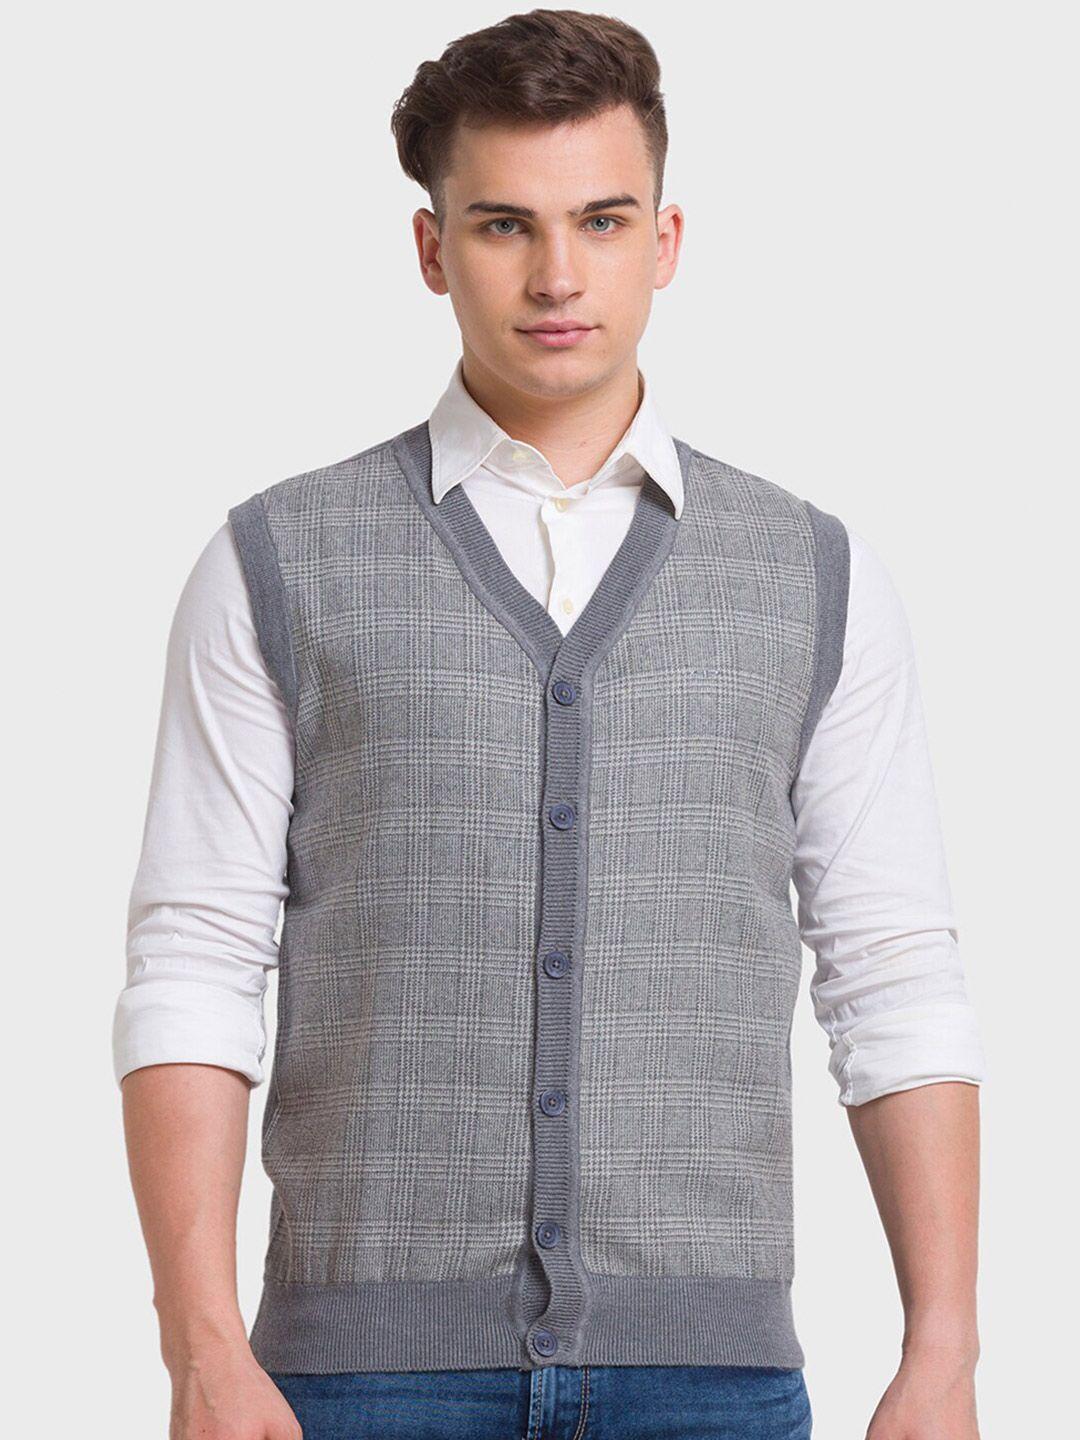 colorplus-classic-fit-checked-cardigan-sweater